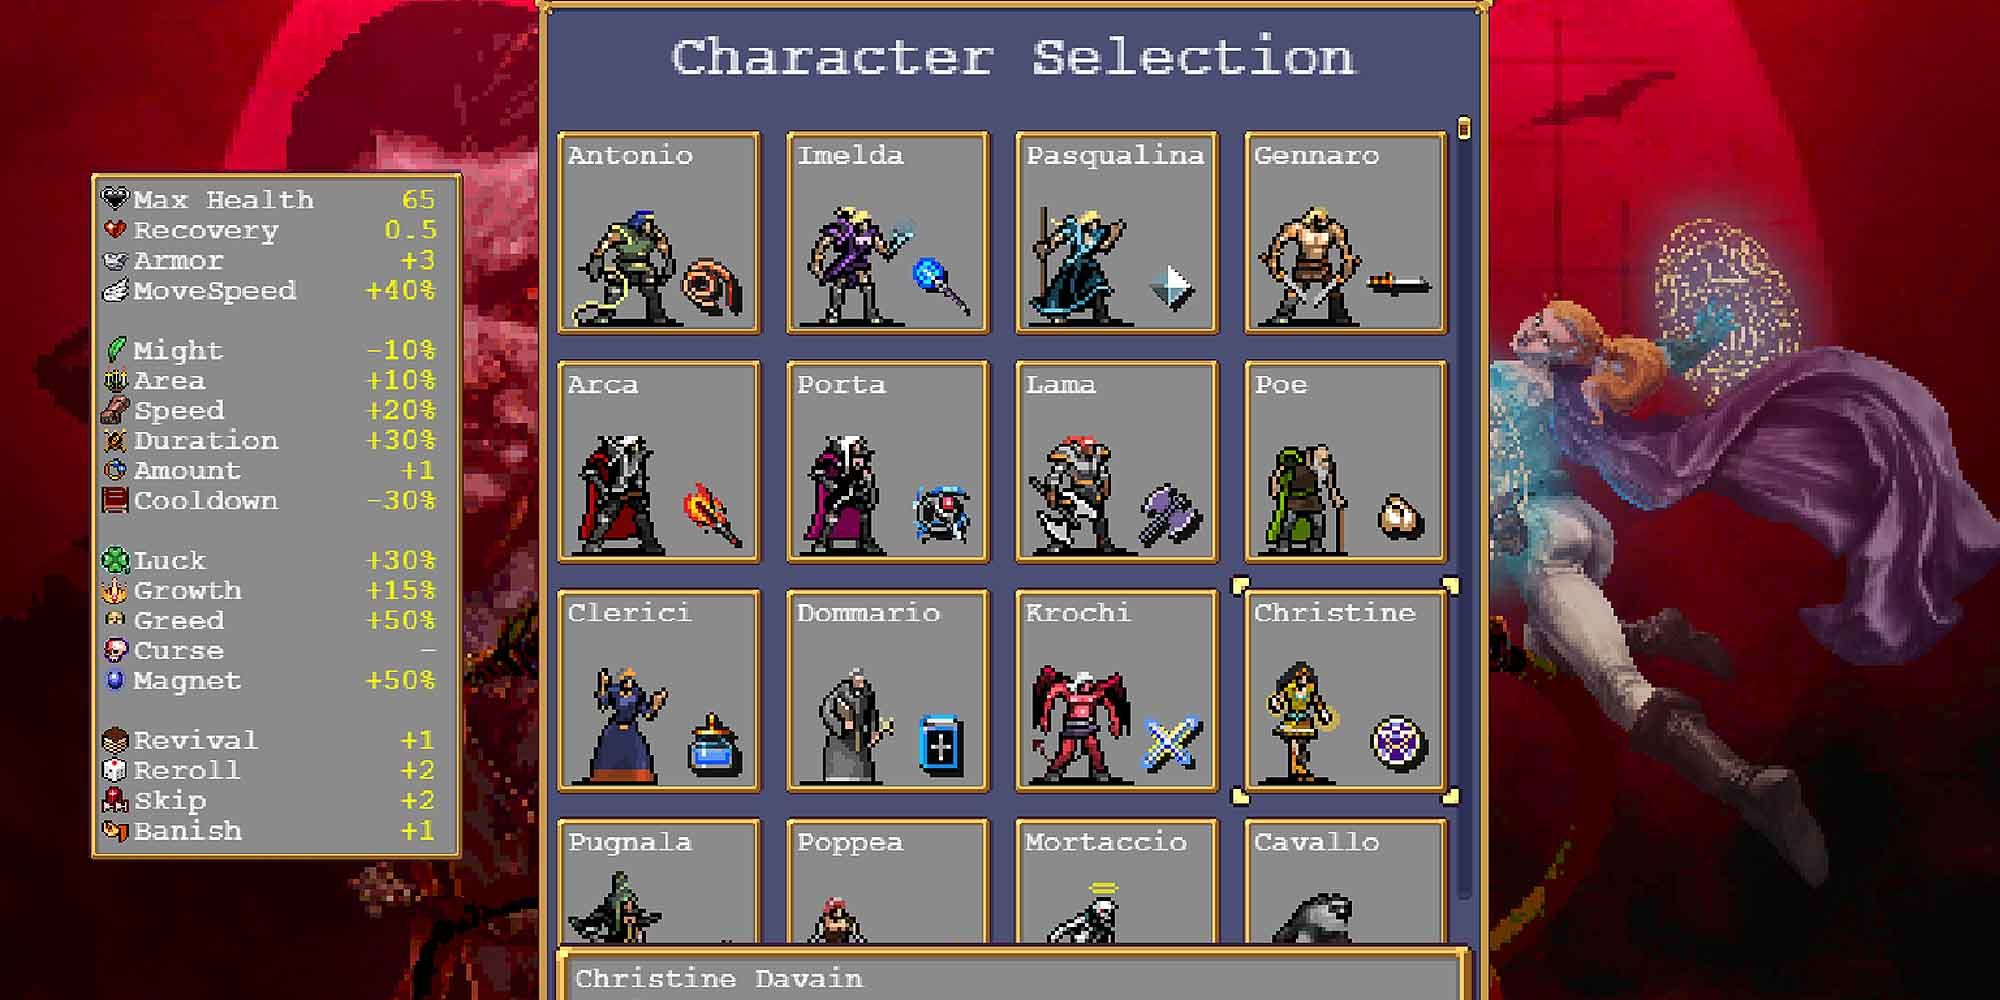 The character selection screen in Vampire Survivors